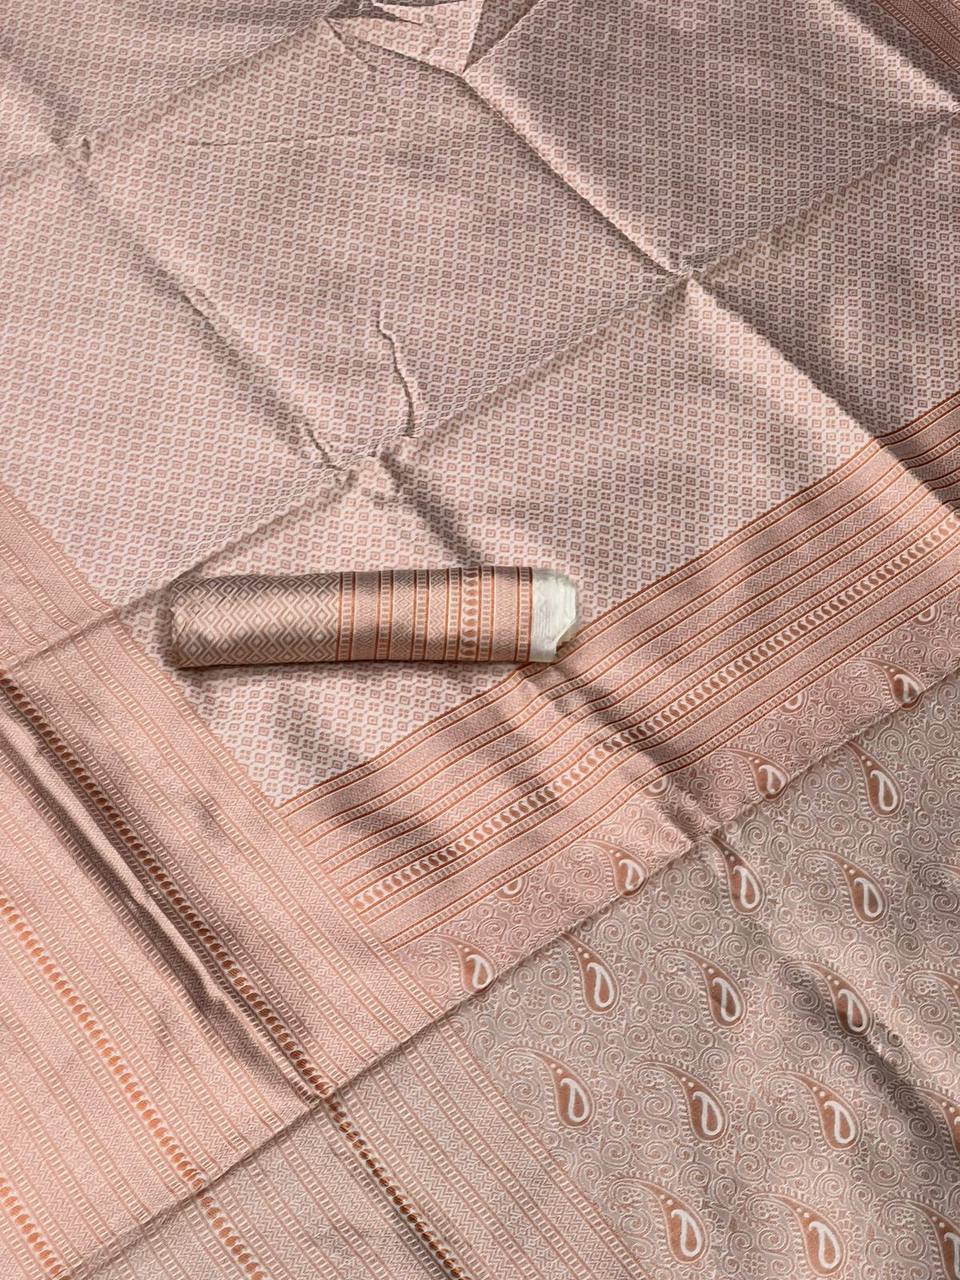 Stunning Off White Colour Saree Weaved With Copper Zari Comes With Heavy Brocade Blouse